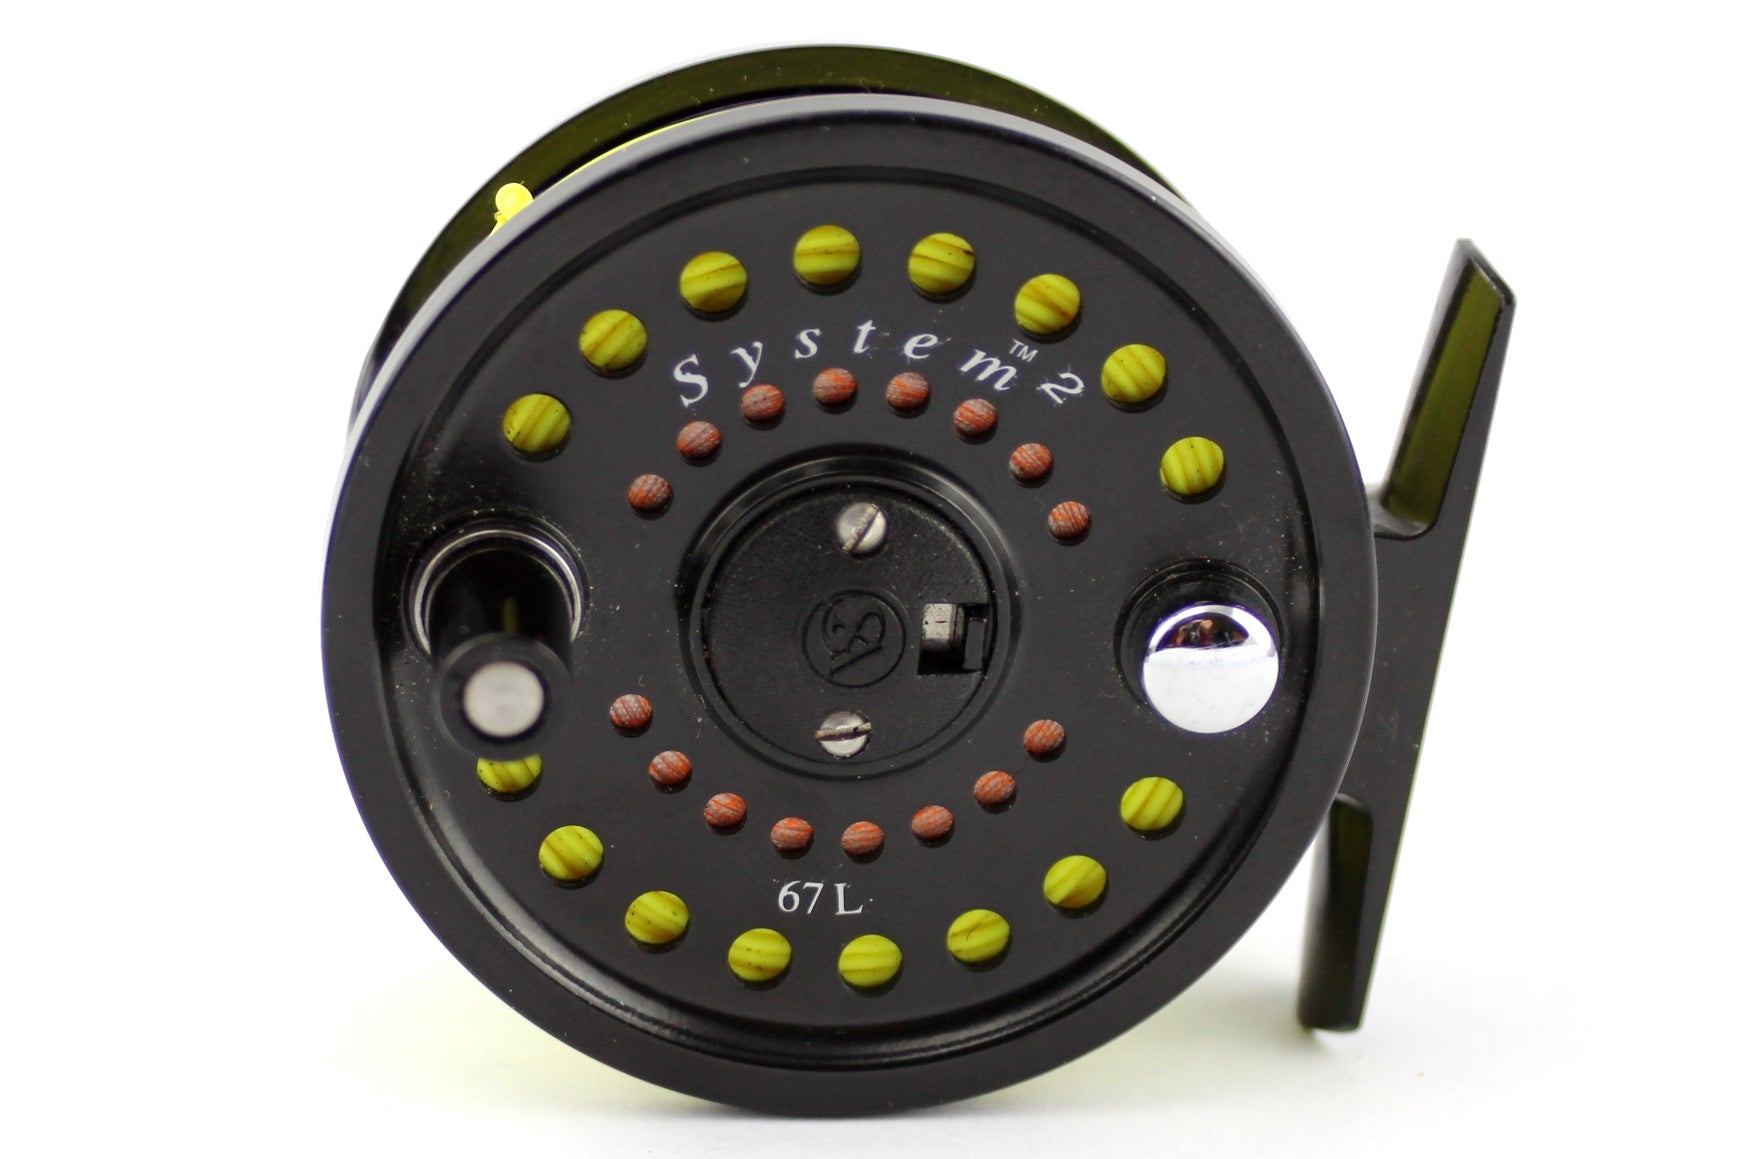 3 System 2 Reel, 6/7 Line Weight, Left Hand Wind